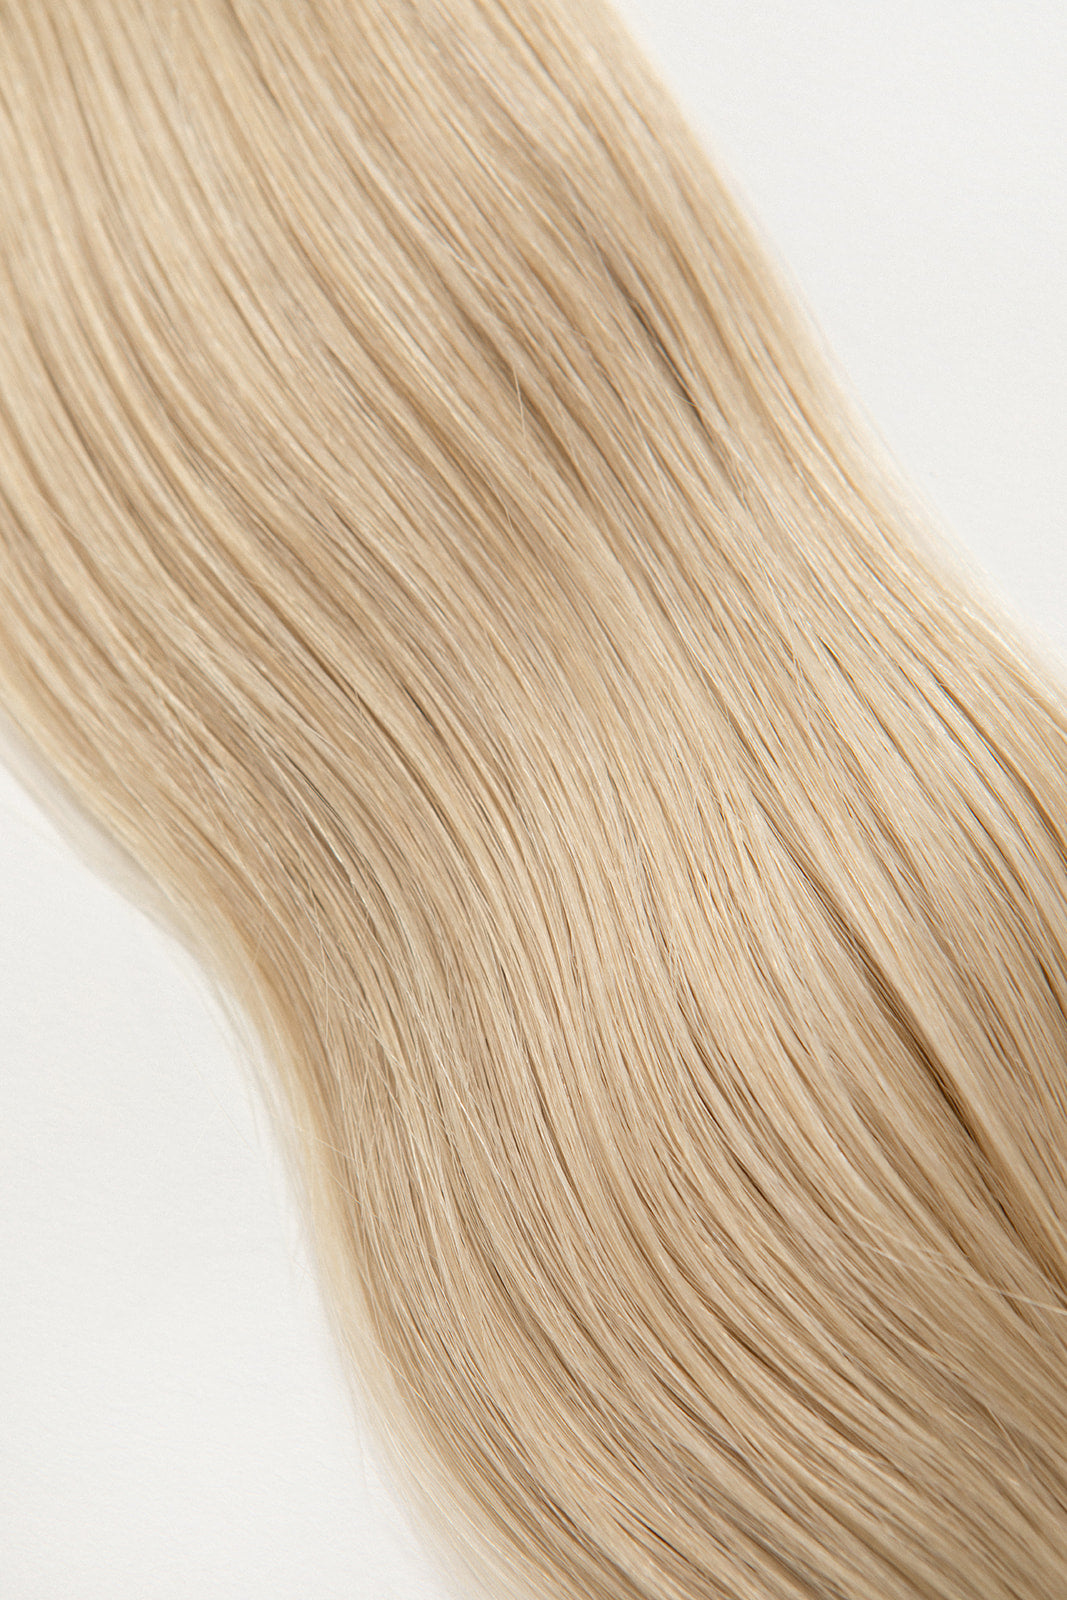 Pearl is our ashy blonde, bright but opalescent. A hard exterior with a soft demeanor. The world is your oyster.  Stylist lingo: Ash level 10 Harloc Tape-In Extensions are made from ethically sourced, premium, Remy Slavic Hair. These reusable hair extensions can be used to add length, volume, chemical-free colour, or to correct or enhance a haircut. Available in 16 beautiful shades. Combine multiple colours to create a custom colour blend and perfect match.